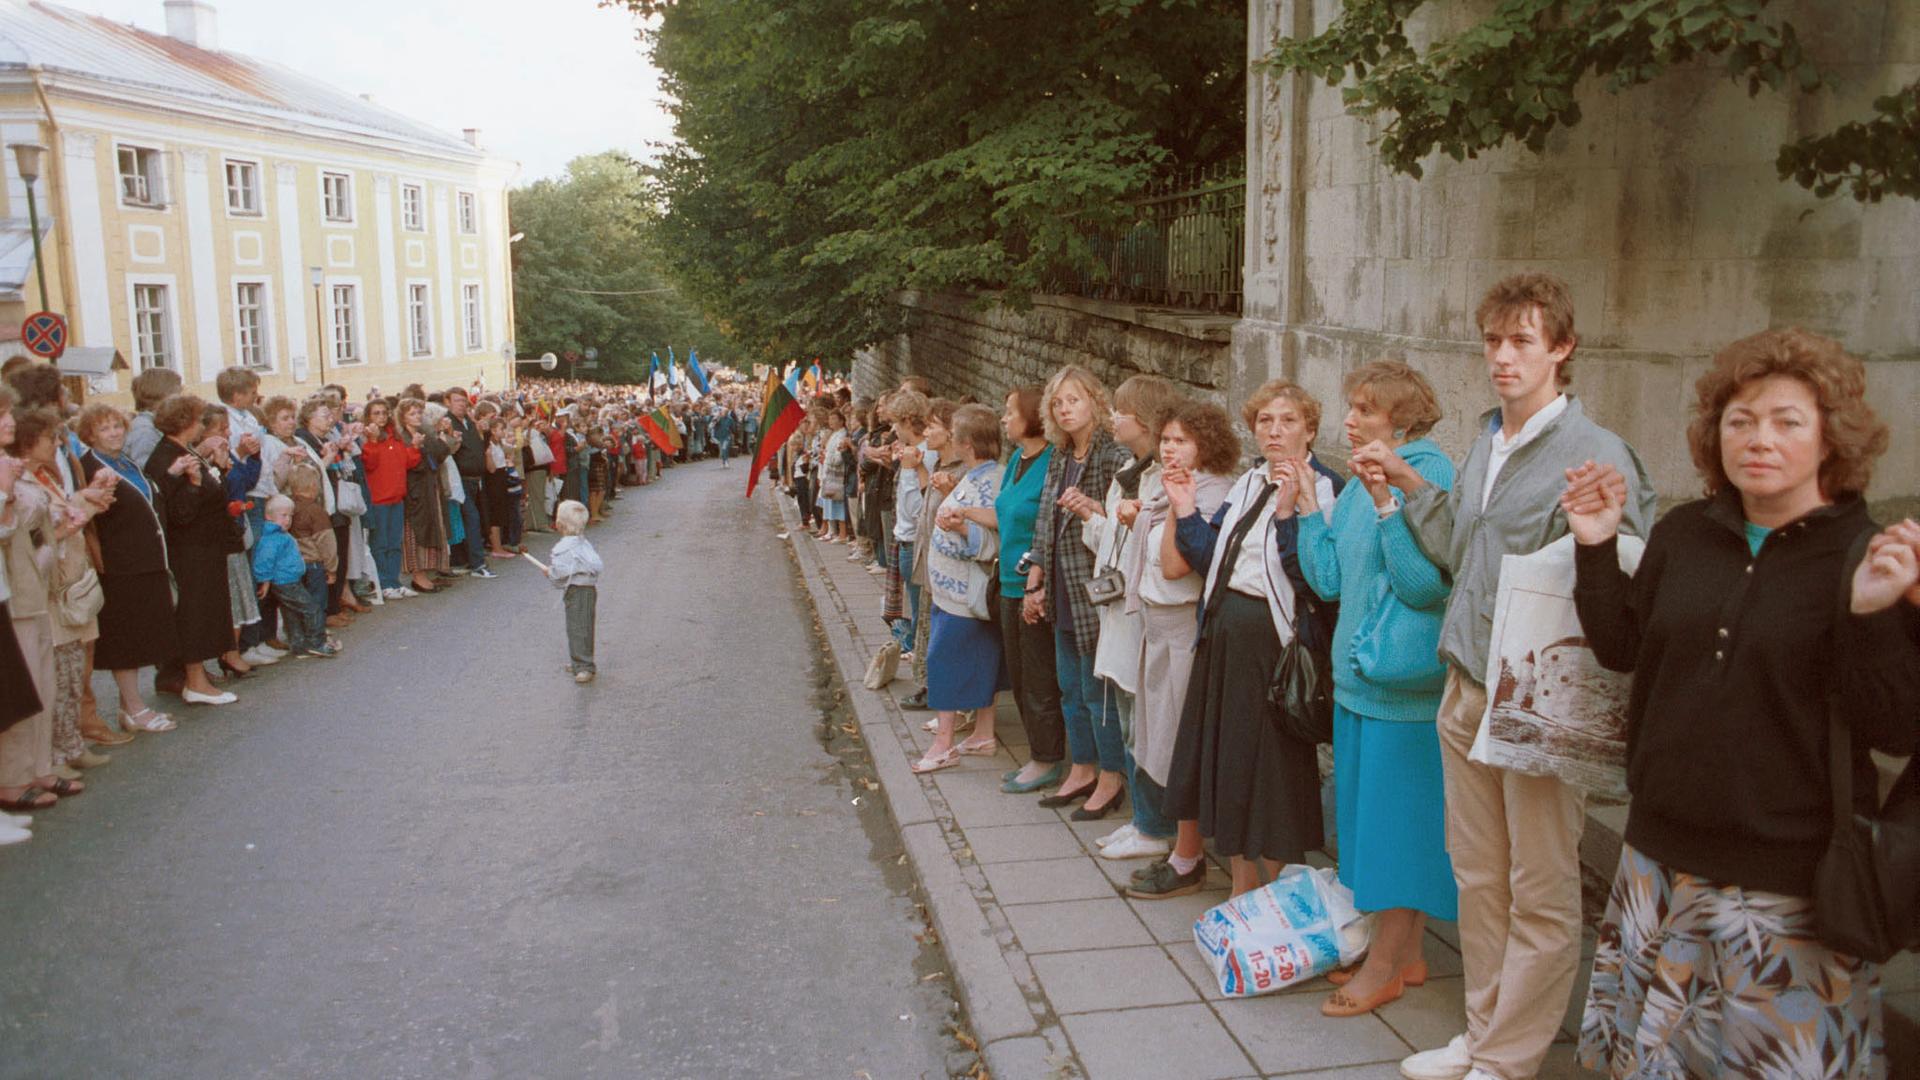 Thousands of people make a human chain from Pikk Hermann in Tallinn, Estonia, to Gediminas' Tower in Vilnius, Lithuania, on Aug. 23 in 1989.